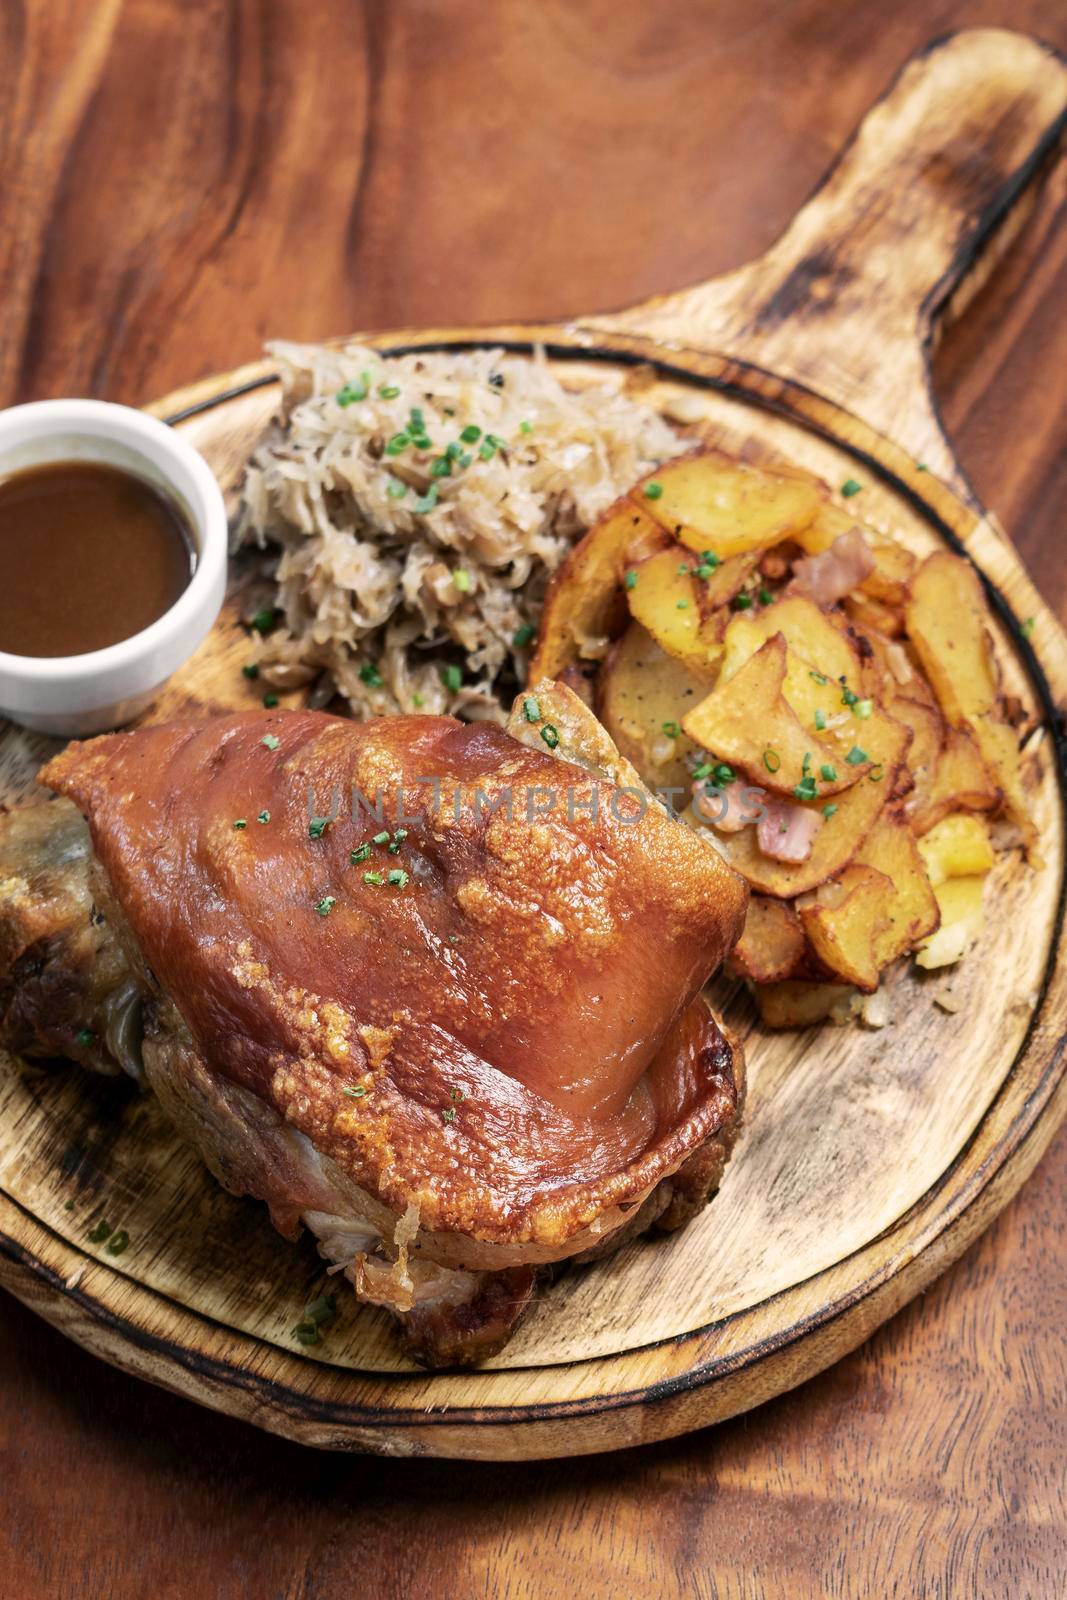 SCHWEINSHAXE traditional german pork knuckle with sauerkraut and potatoes bavarian meal on rustic wood background